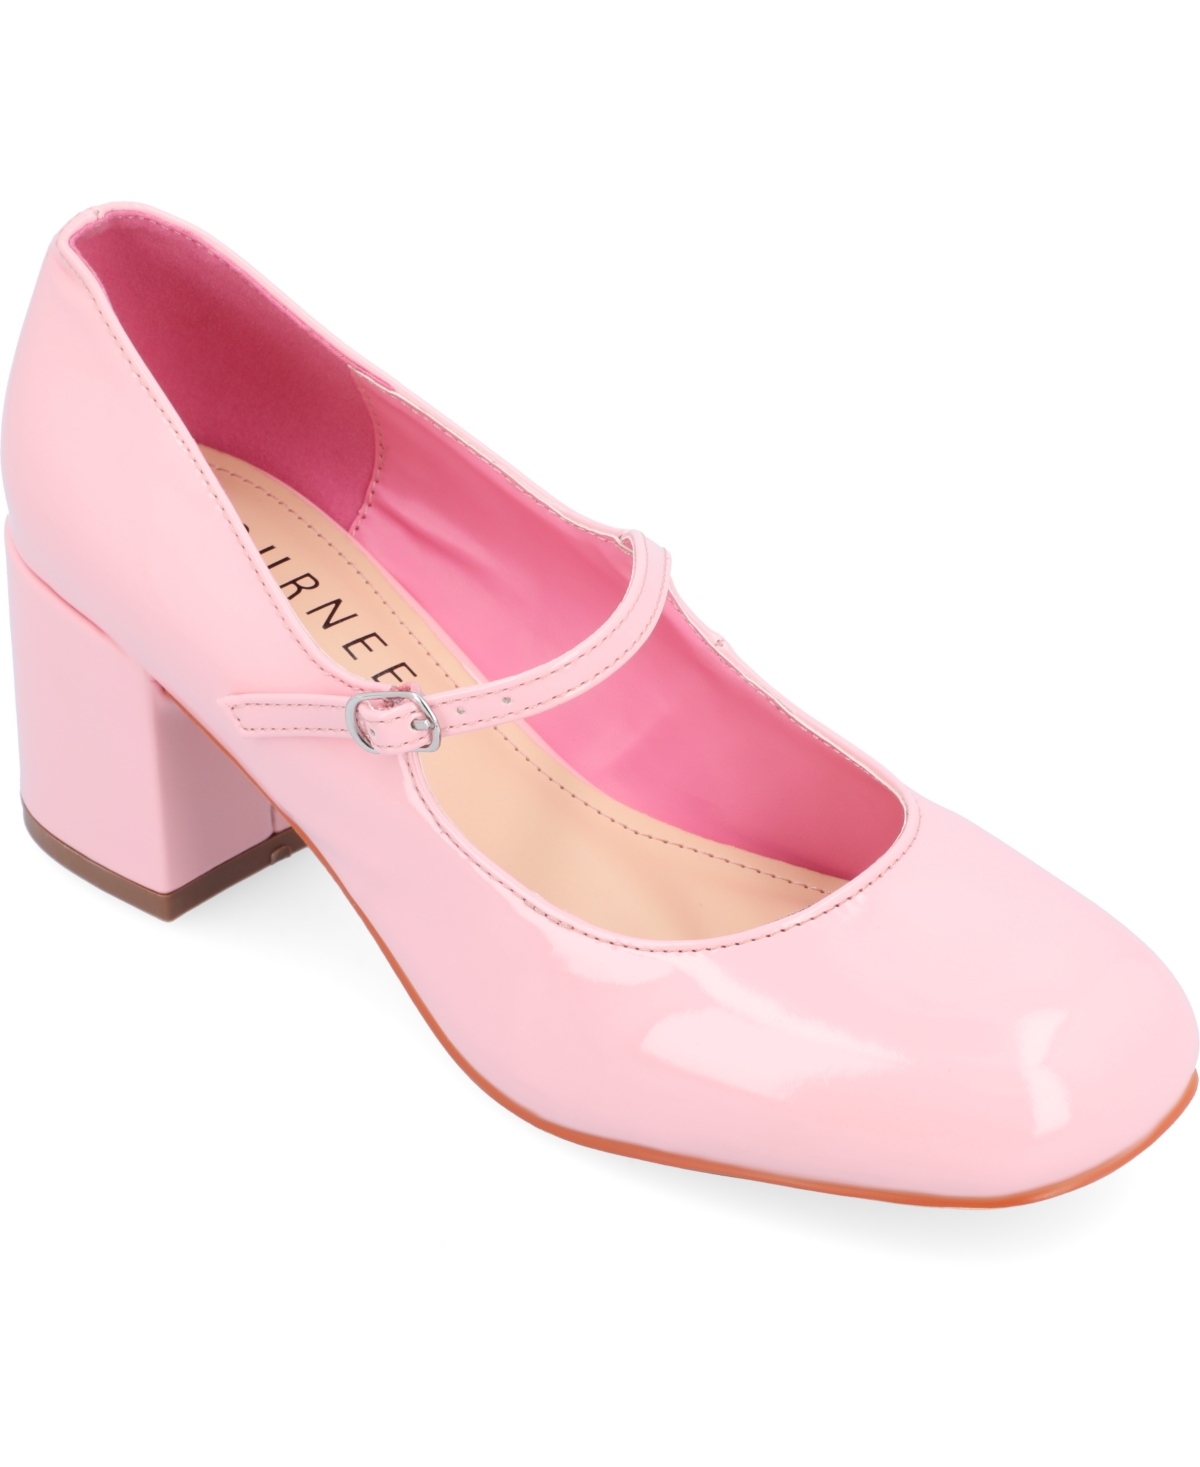 60s Shoes, Go Go Boots | 1960s Shoes, Flats, Heels, Boots Journee Collection Womens Okenna Heels - Pink $74.99 AT vintagedancer.com